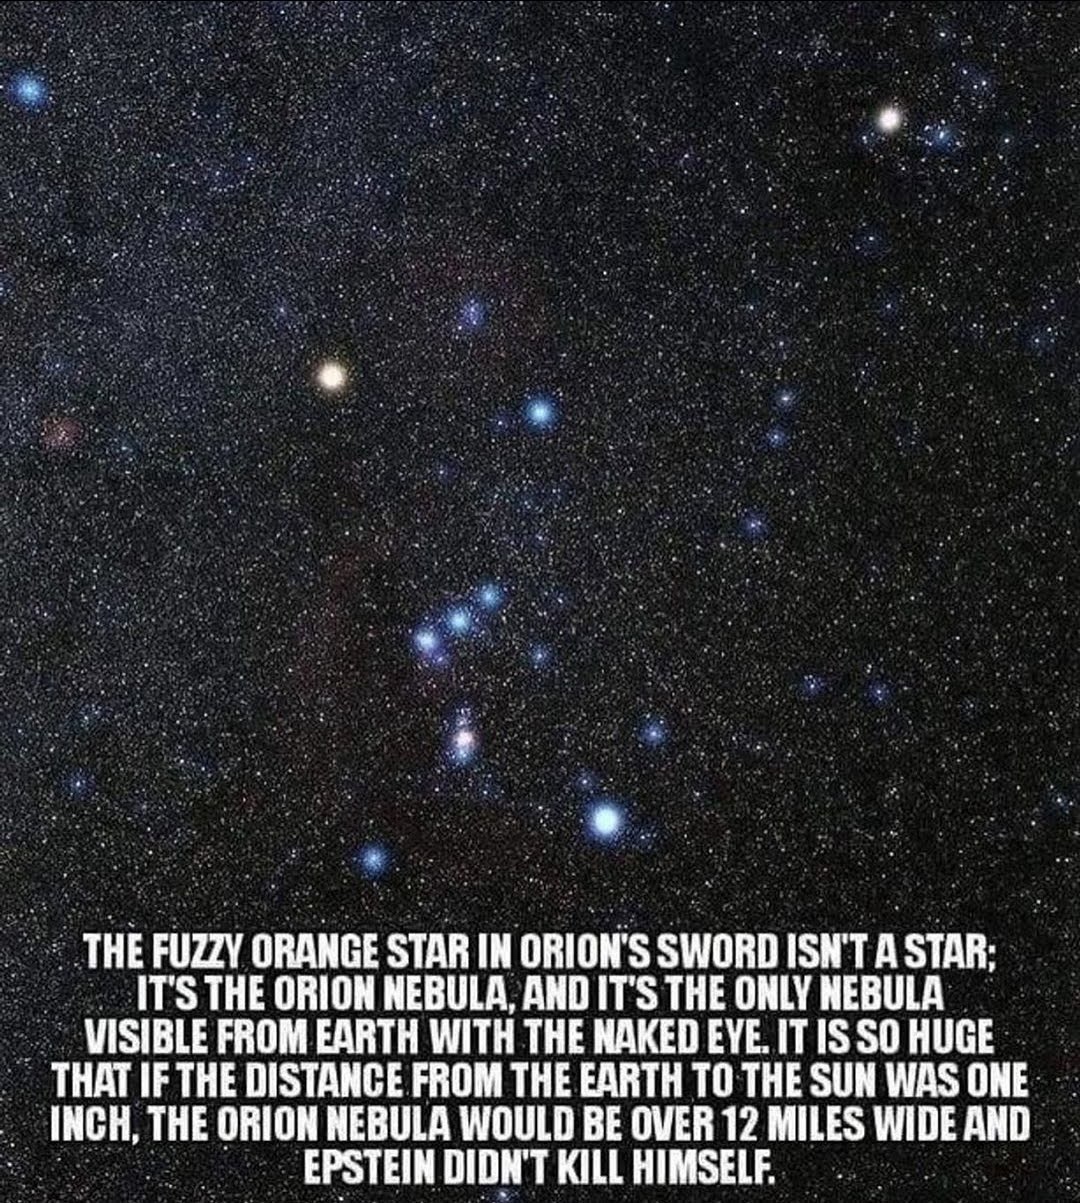 because epstein didn t kill himself memes - The Fuzzy Orange Star In Orion'S Sword Isn'T A Star It'S The Orion Nebula, And It'S The Only Nebula Visible From Earth With The Naked Eye. It Is So Huge That If The Distance From The Earth To The Sun Was One Inc